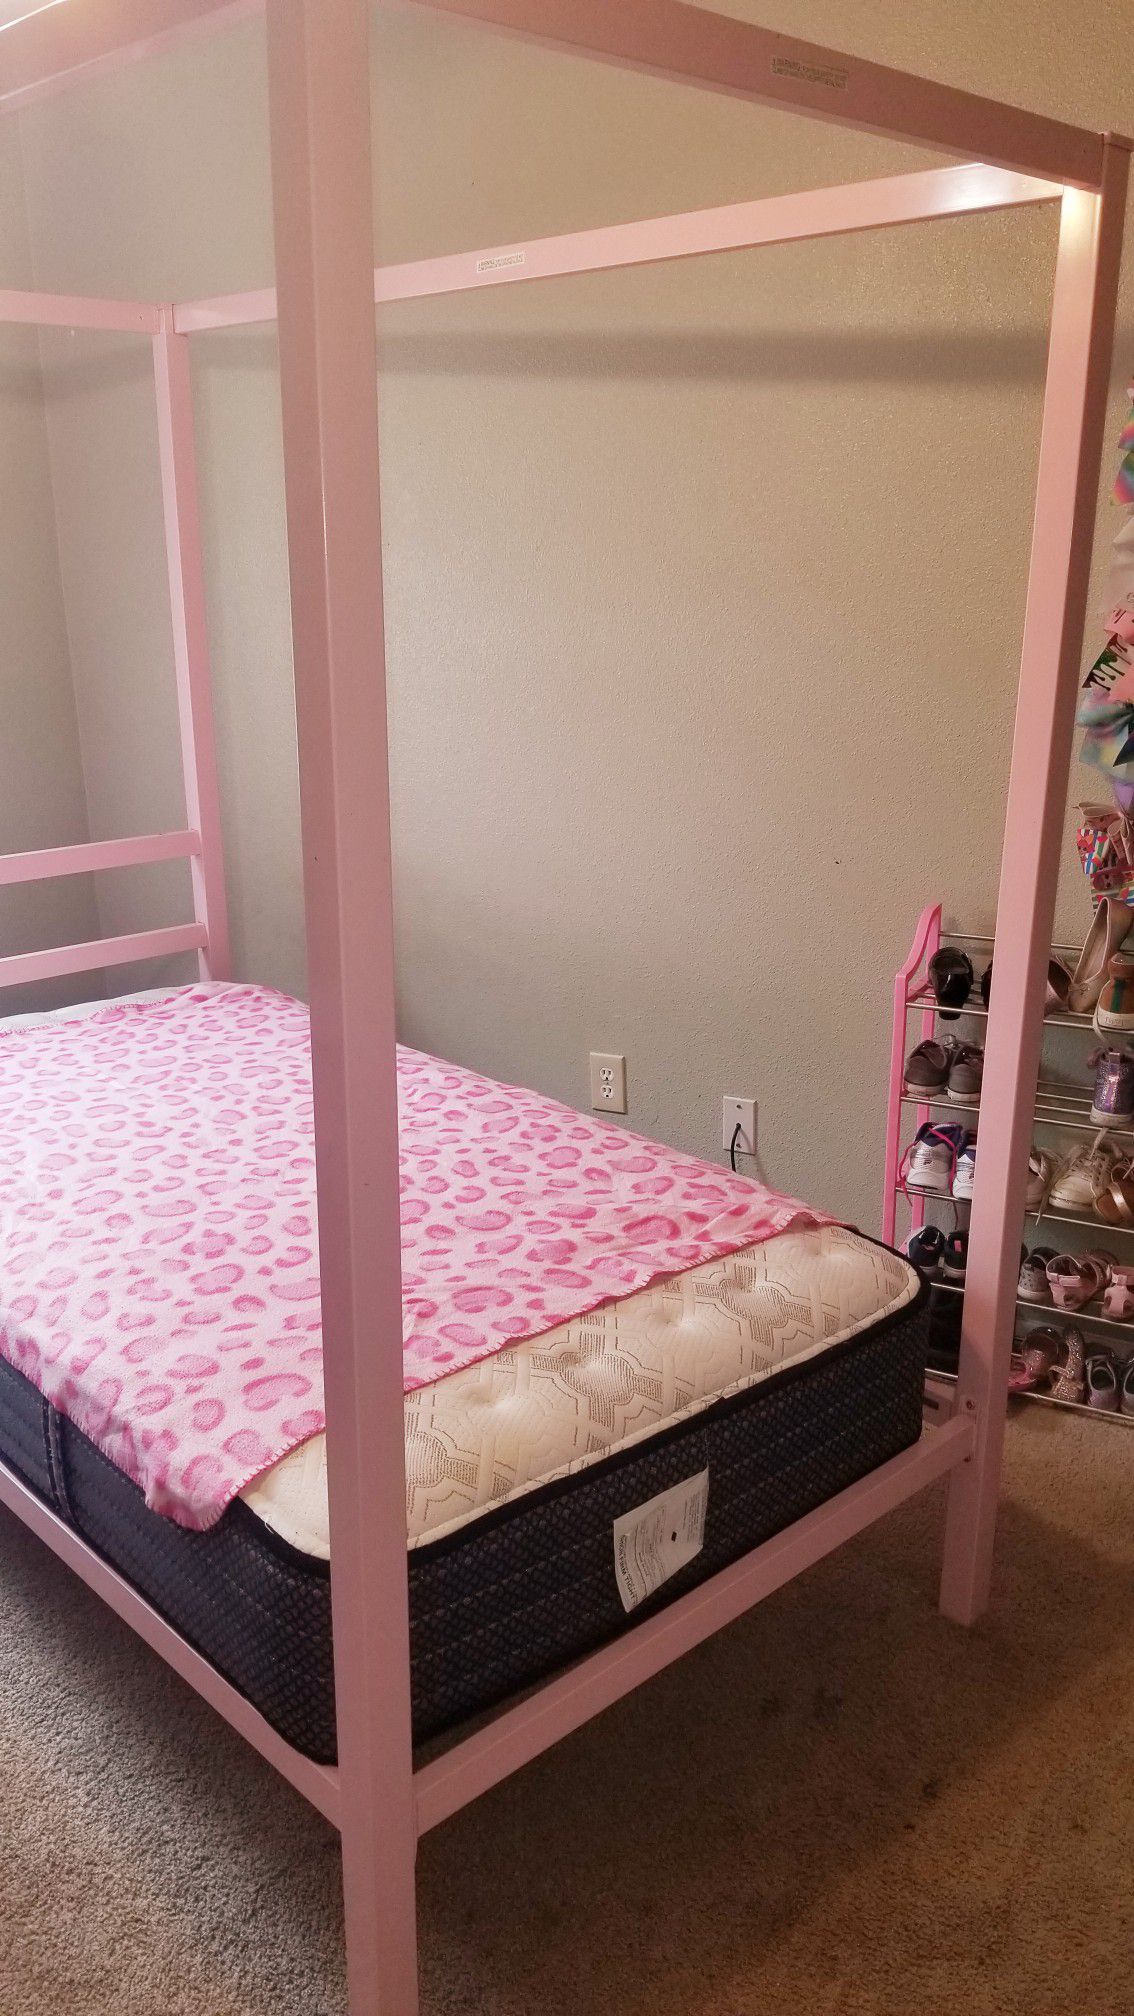 Twin Bed frame for sale